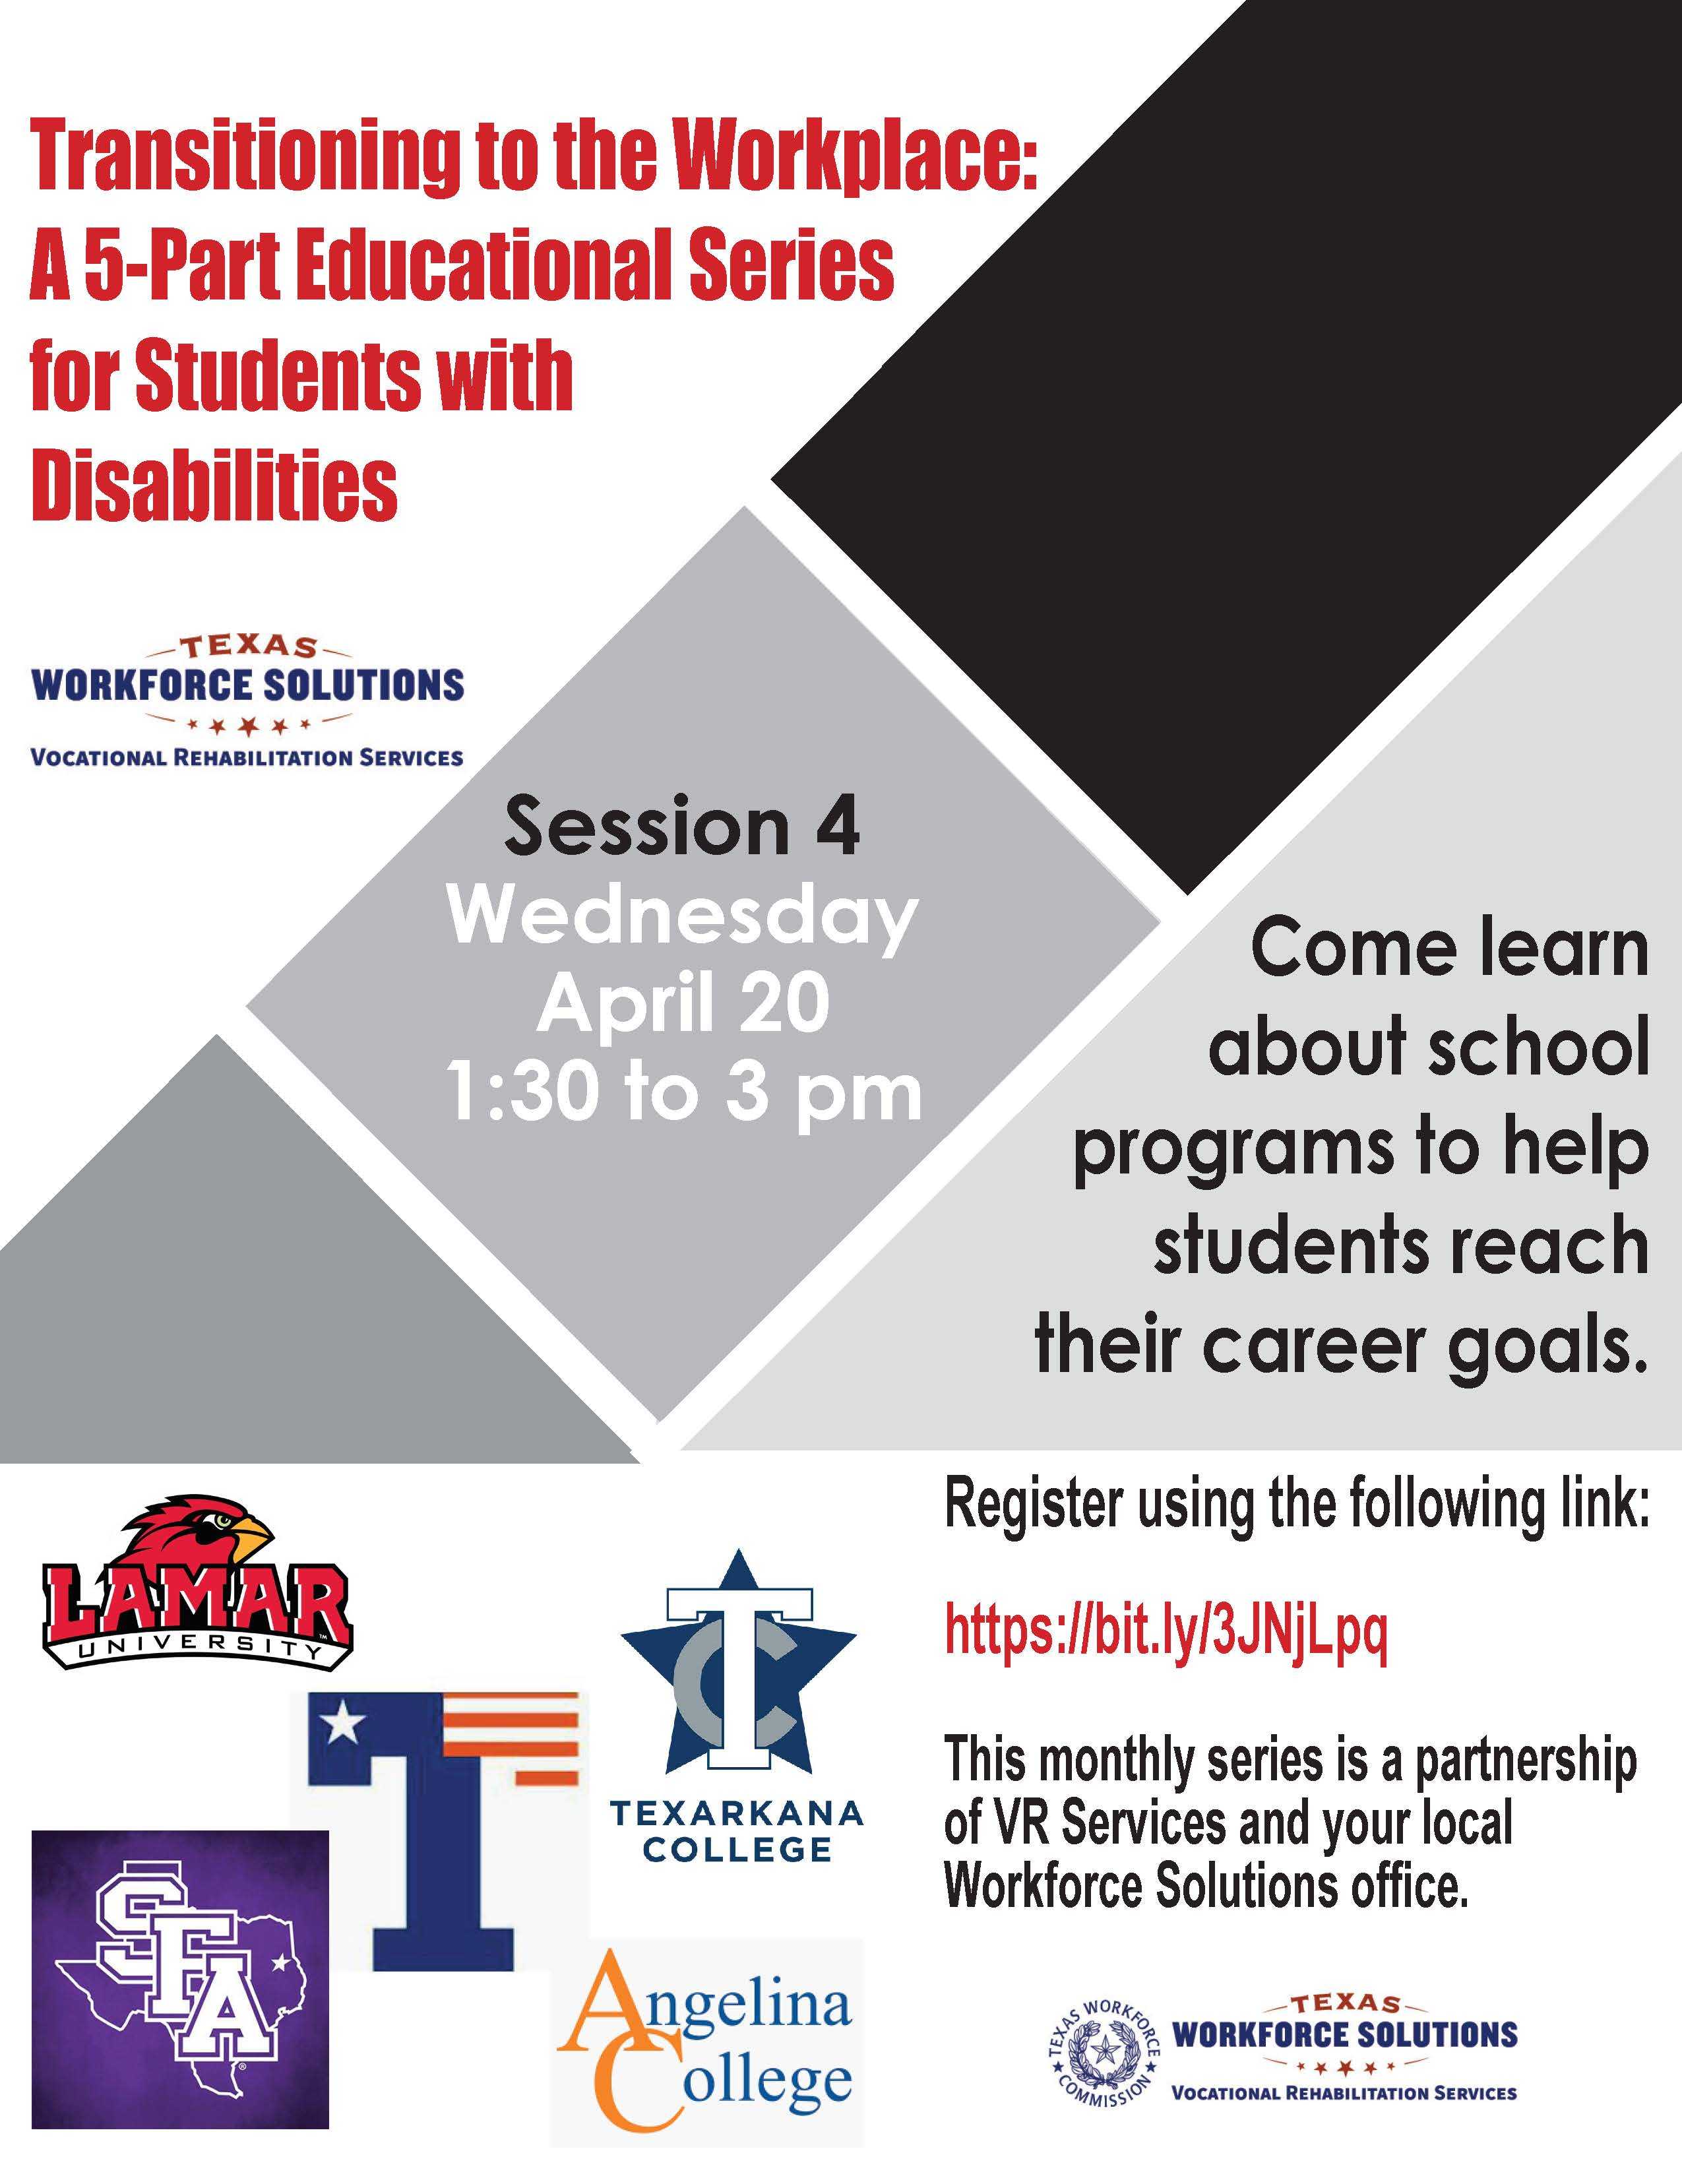 Transitioning to the Workplace Series 4 for Students with Disabilities